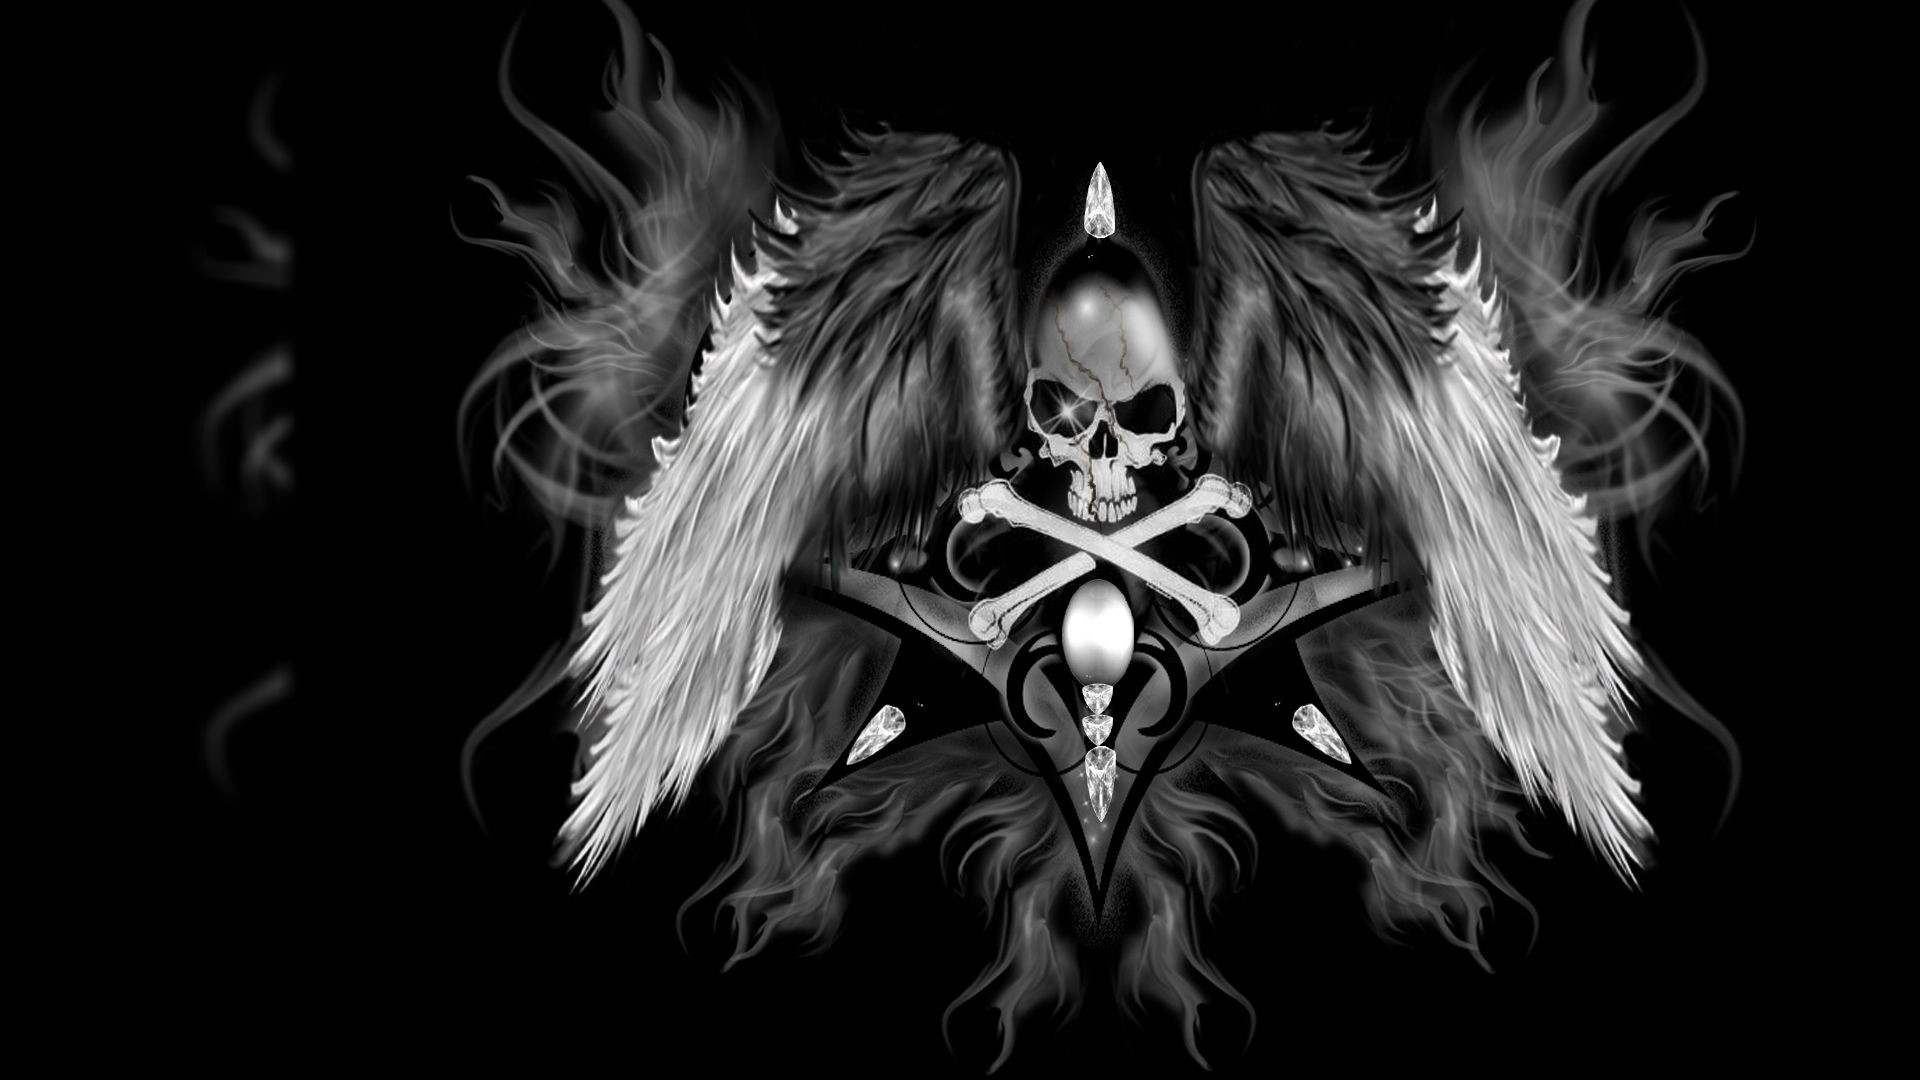 1920x1080 Skull Wallpapers Group 69